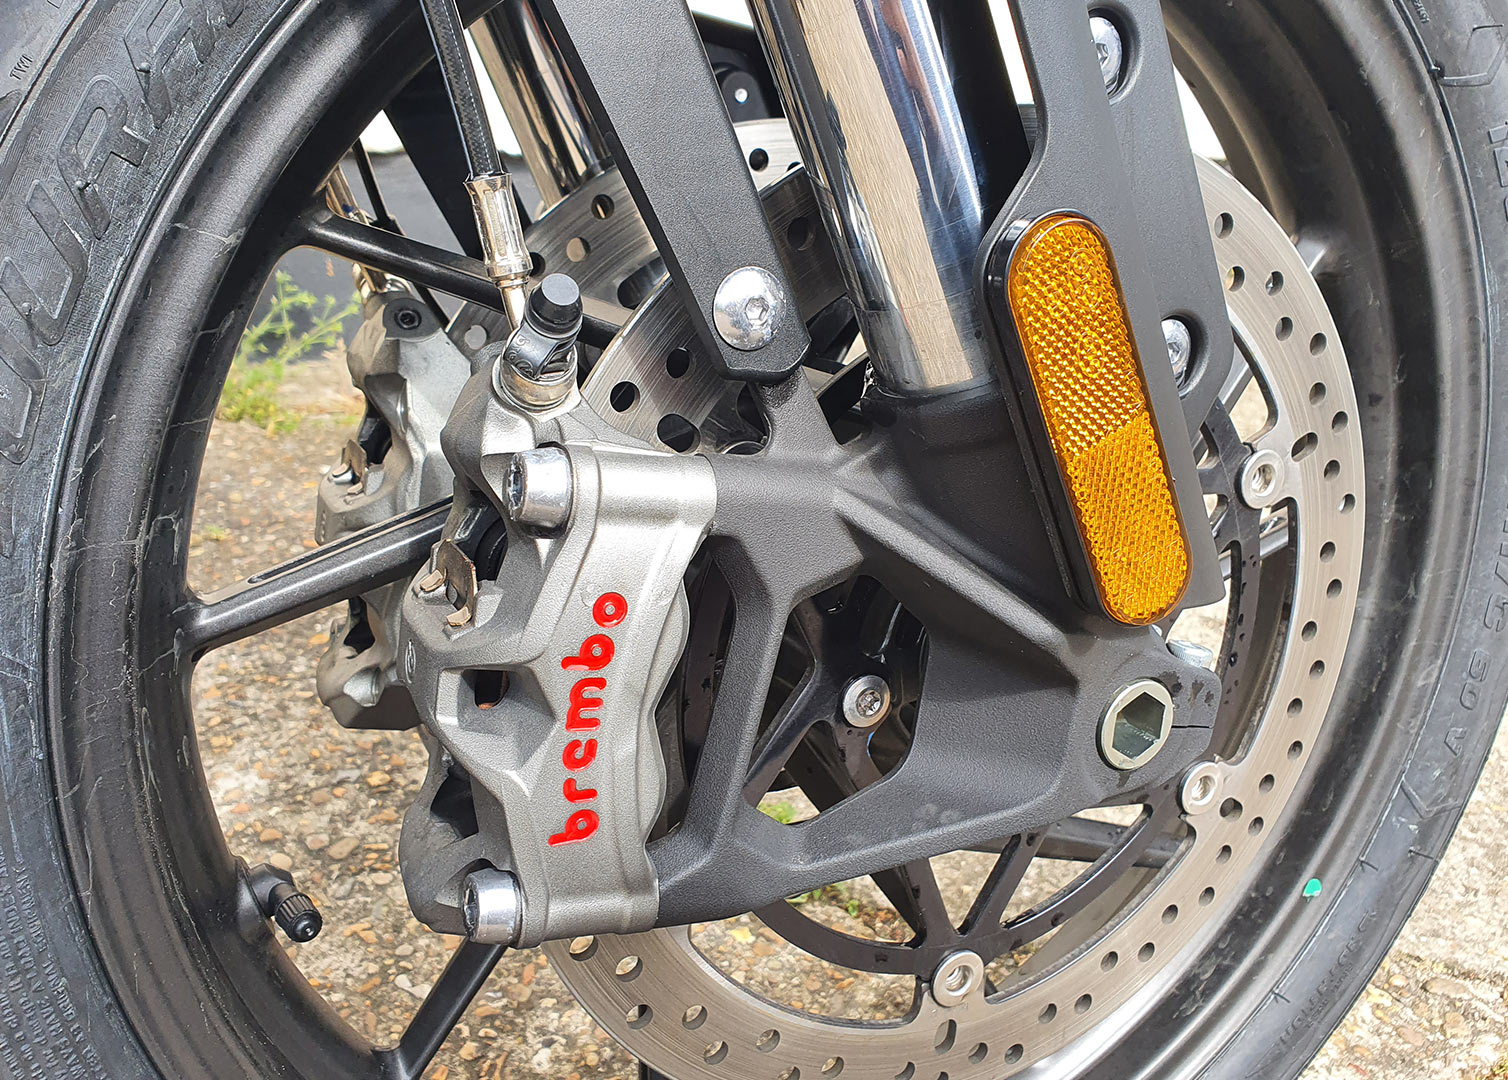 The Tiger 1200 Review - Ryan Insight Brakes, Handling, Riding position